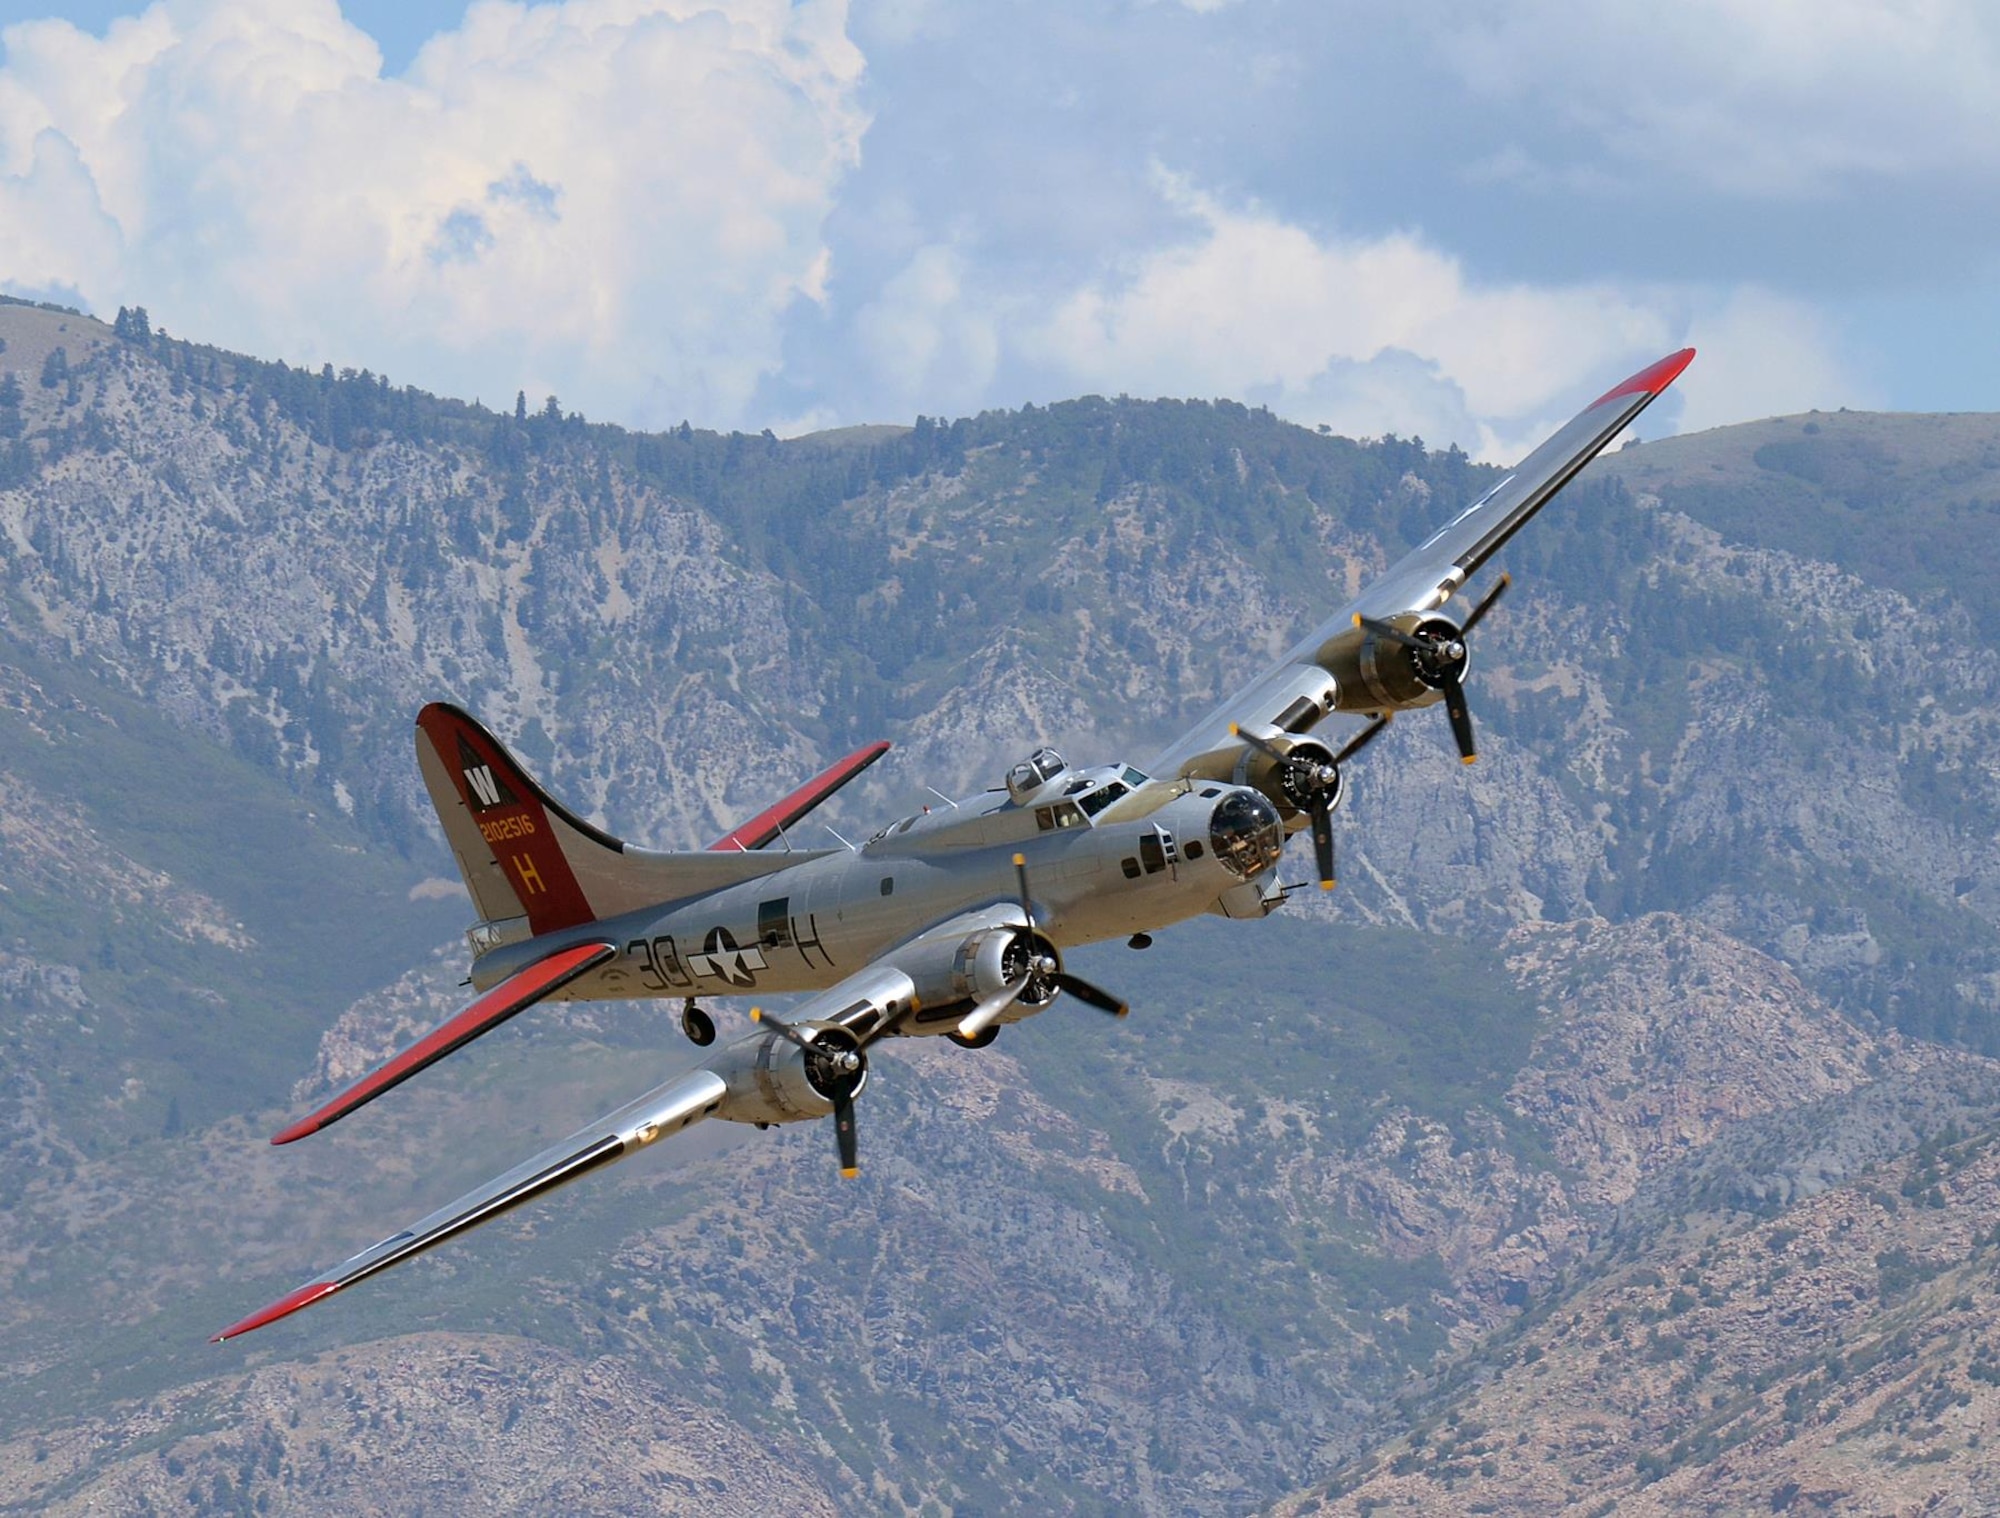 The Experimental Aircraft Association’s B-17, also known as “Aluminum Overcast,”  banks right above Hill Air Force Base, Utah, Aug. 13, 2015.  EAA’s B-17 is painted to resemble B-17G No. 42-102515 of the 398th Bombardment Group (Heavy) that flew from Royal Air Force Nuthampstead, England, during World War II. That aircraft was shot down over Le Manior, France, on Aug. 13, 1944, during its 34th combat mission. (U.S. Air Force photo/R. Nial Bradshaw)